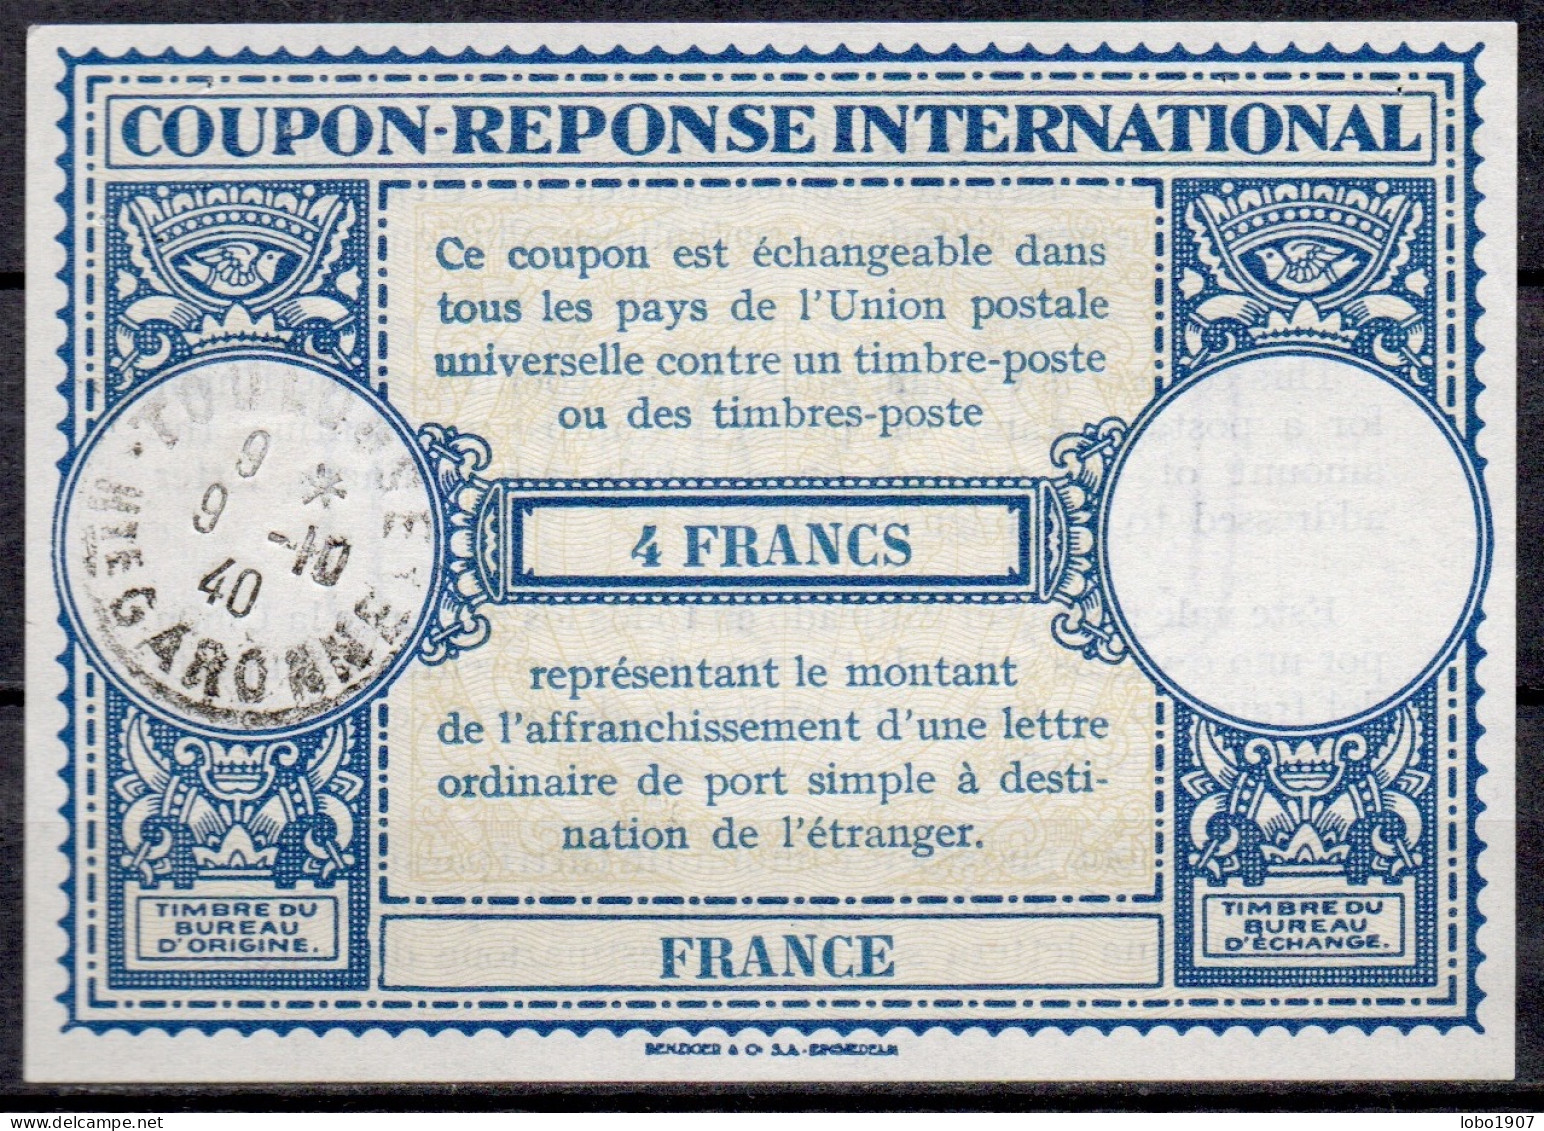 FRANCE  Rare Type Lo13ap  4 FRANCS  International Reply Coupon Reponse Antwortschein IRC IAS Cupon Respuesta O TOULOUSE - Antwortscheine